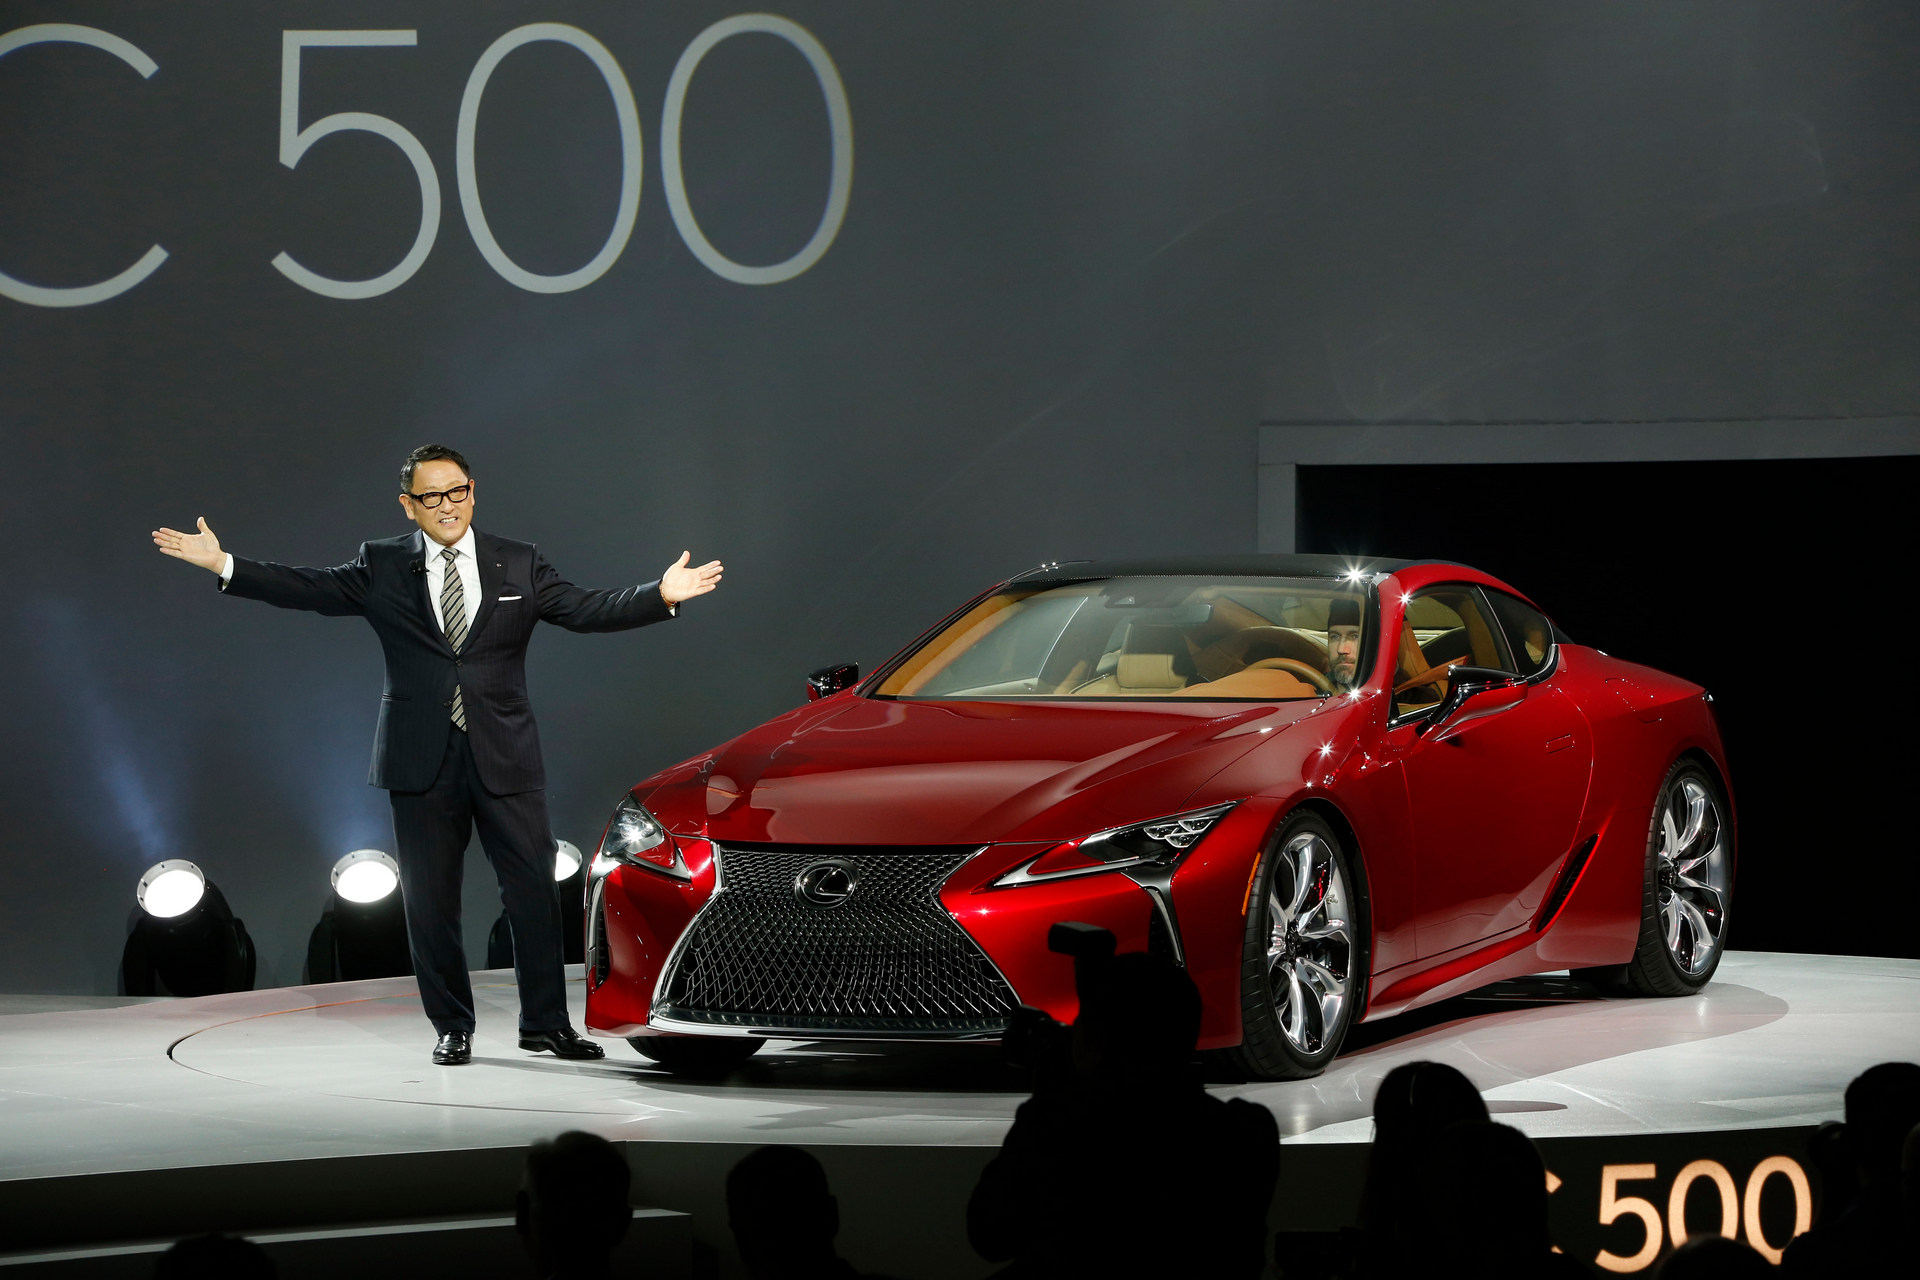 Toyota Motor Corporation President and Lexus Chief Branding Officer Akio Toyoda unveils the all-new Lexus LC 500 luxury sports car at the North American International Auto Show in Detroit © Toyota Motor Corporation